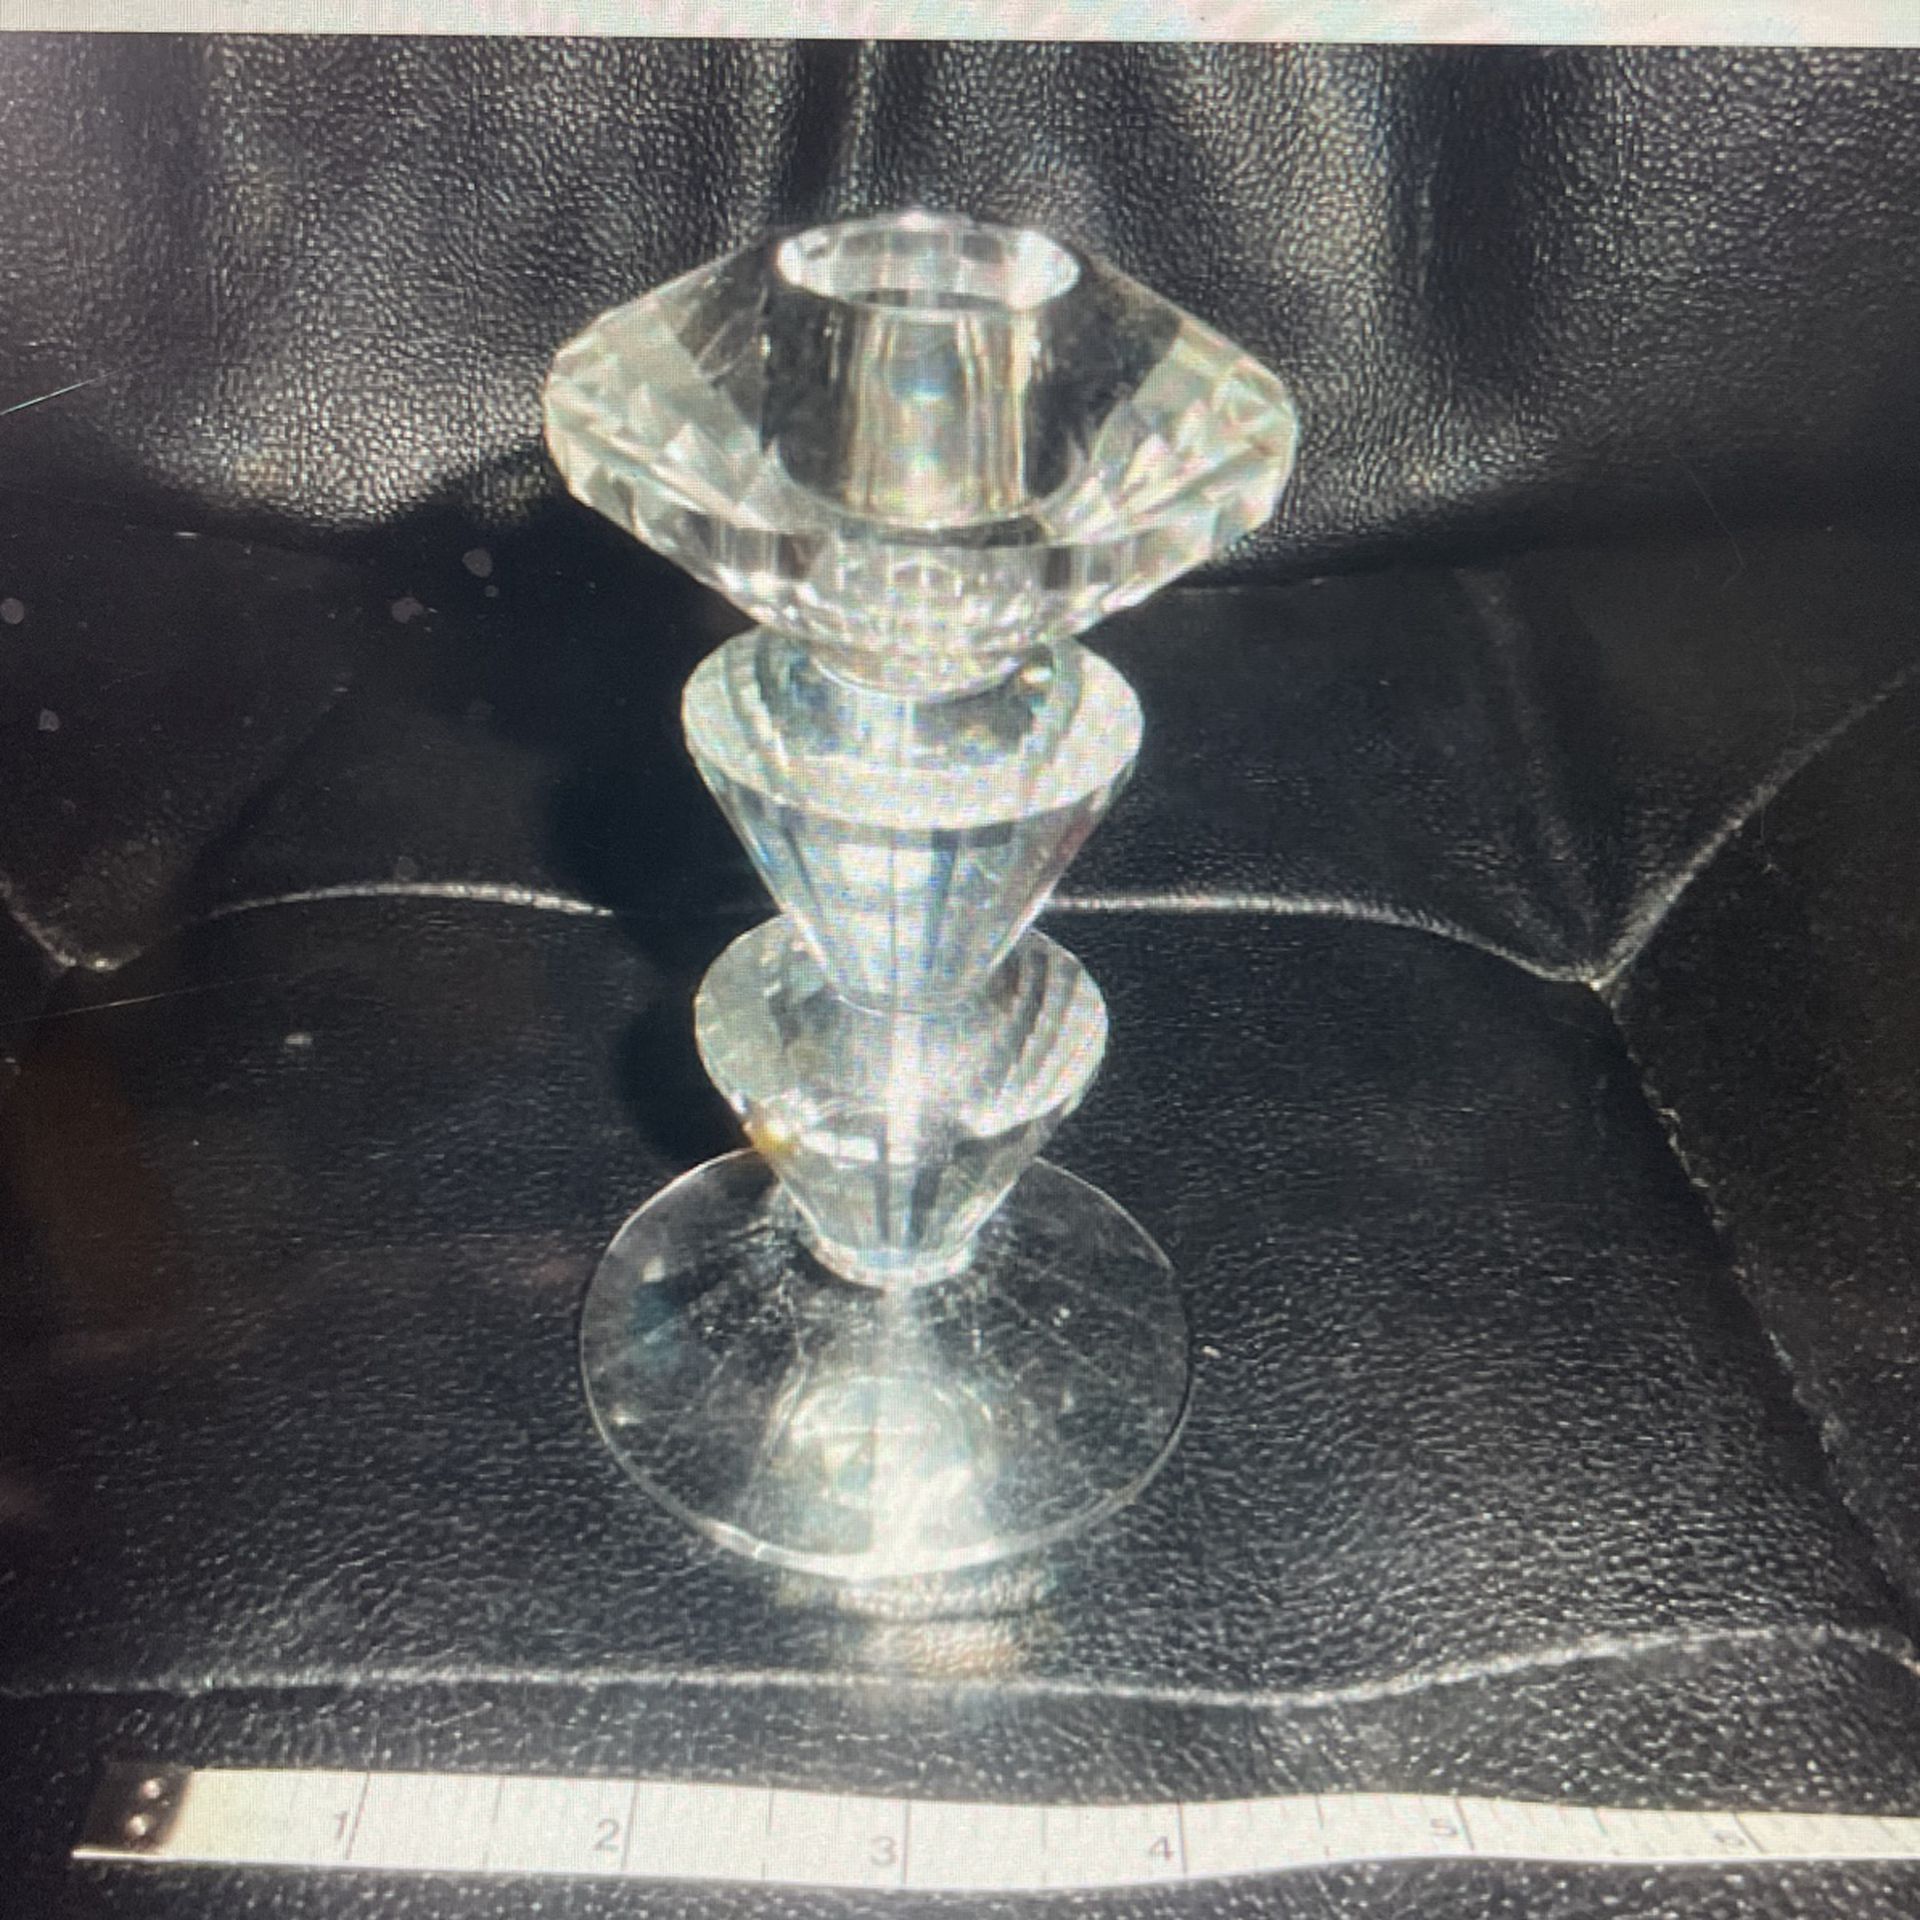 Vtg Deco SD Simon Designs Clear Glass Cut Crystal Candlestick Holder Marked 4.5"